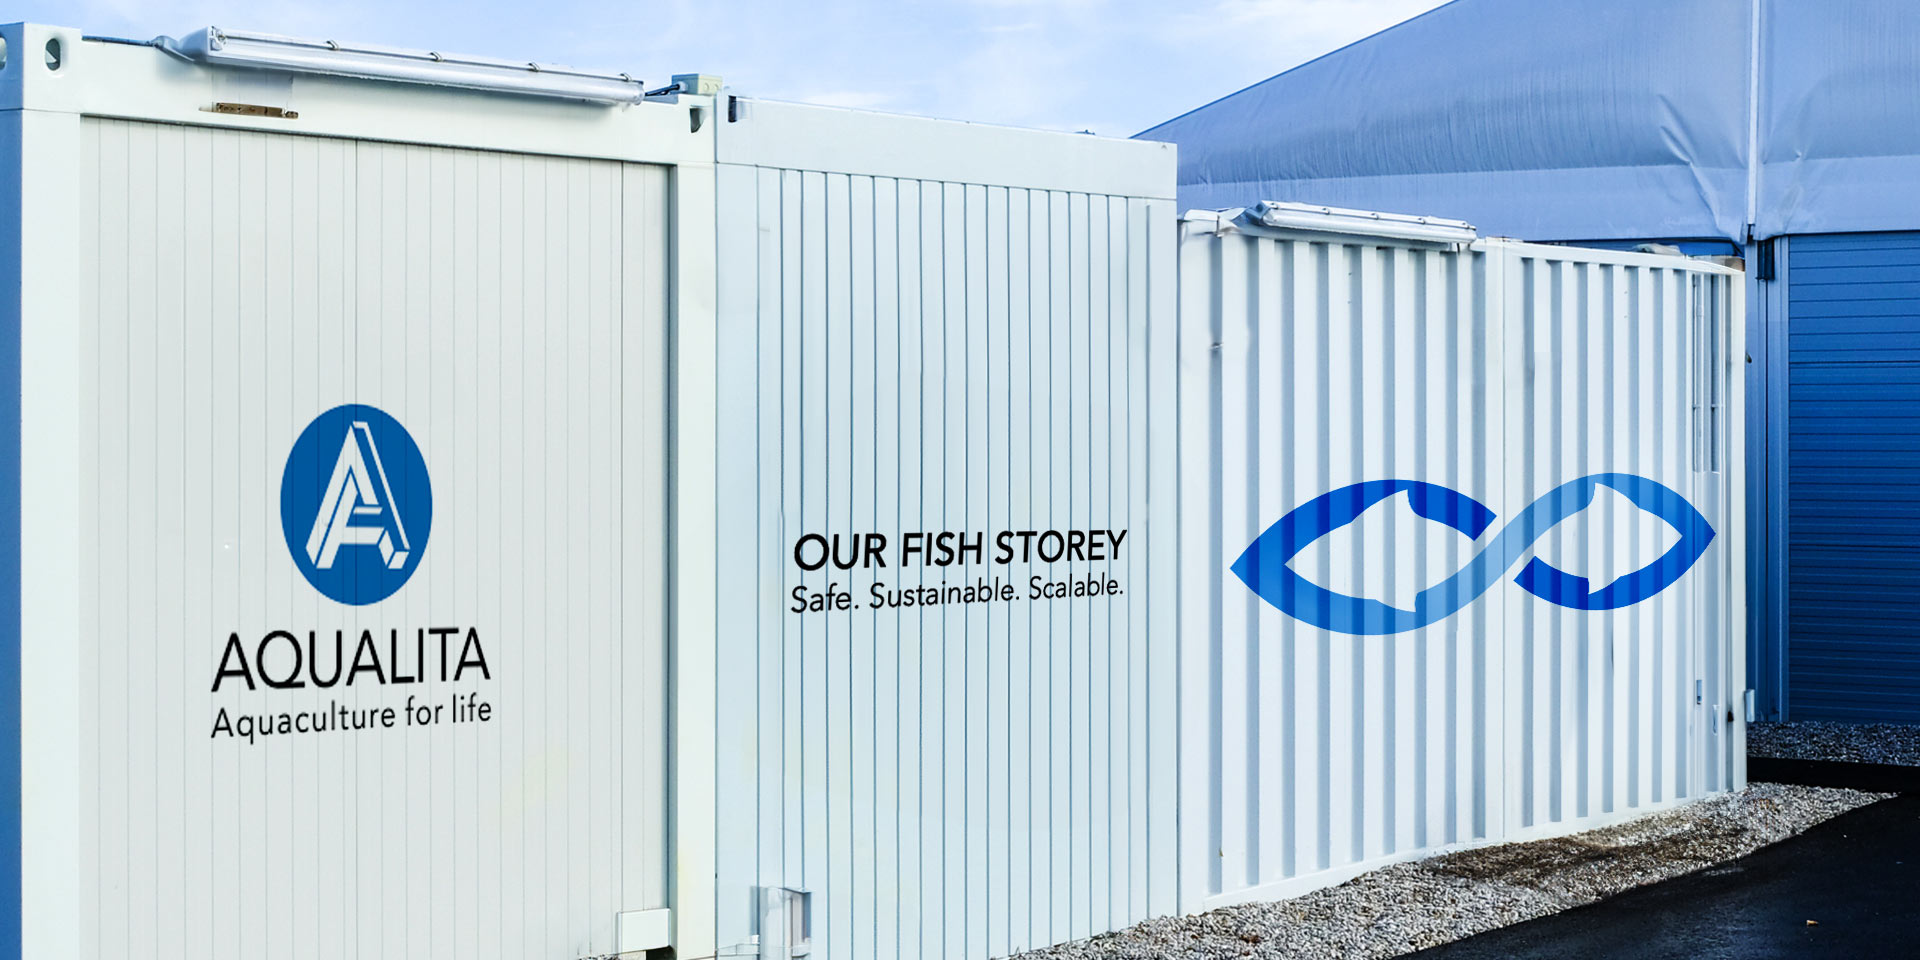 SINGAPORE’S FIRST URBAN FISH FARM IN A CONTAINER  